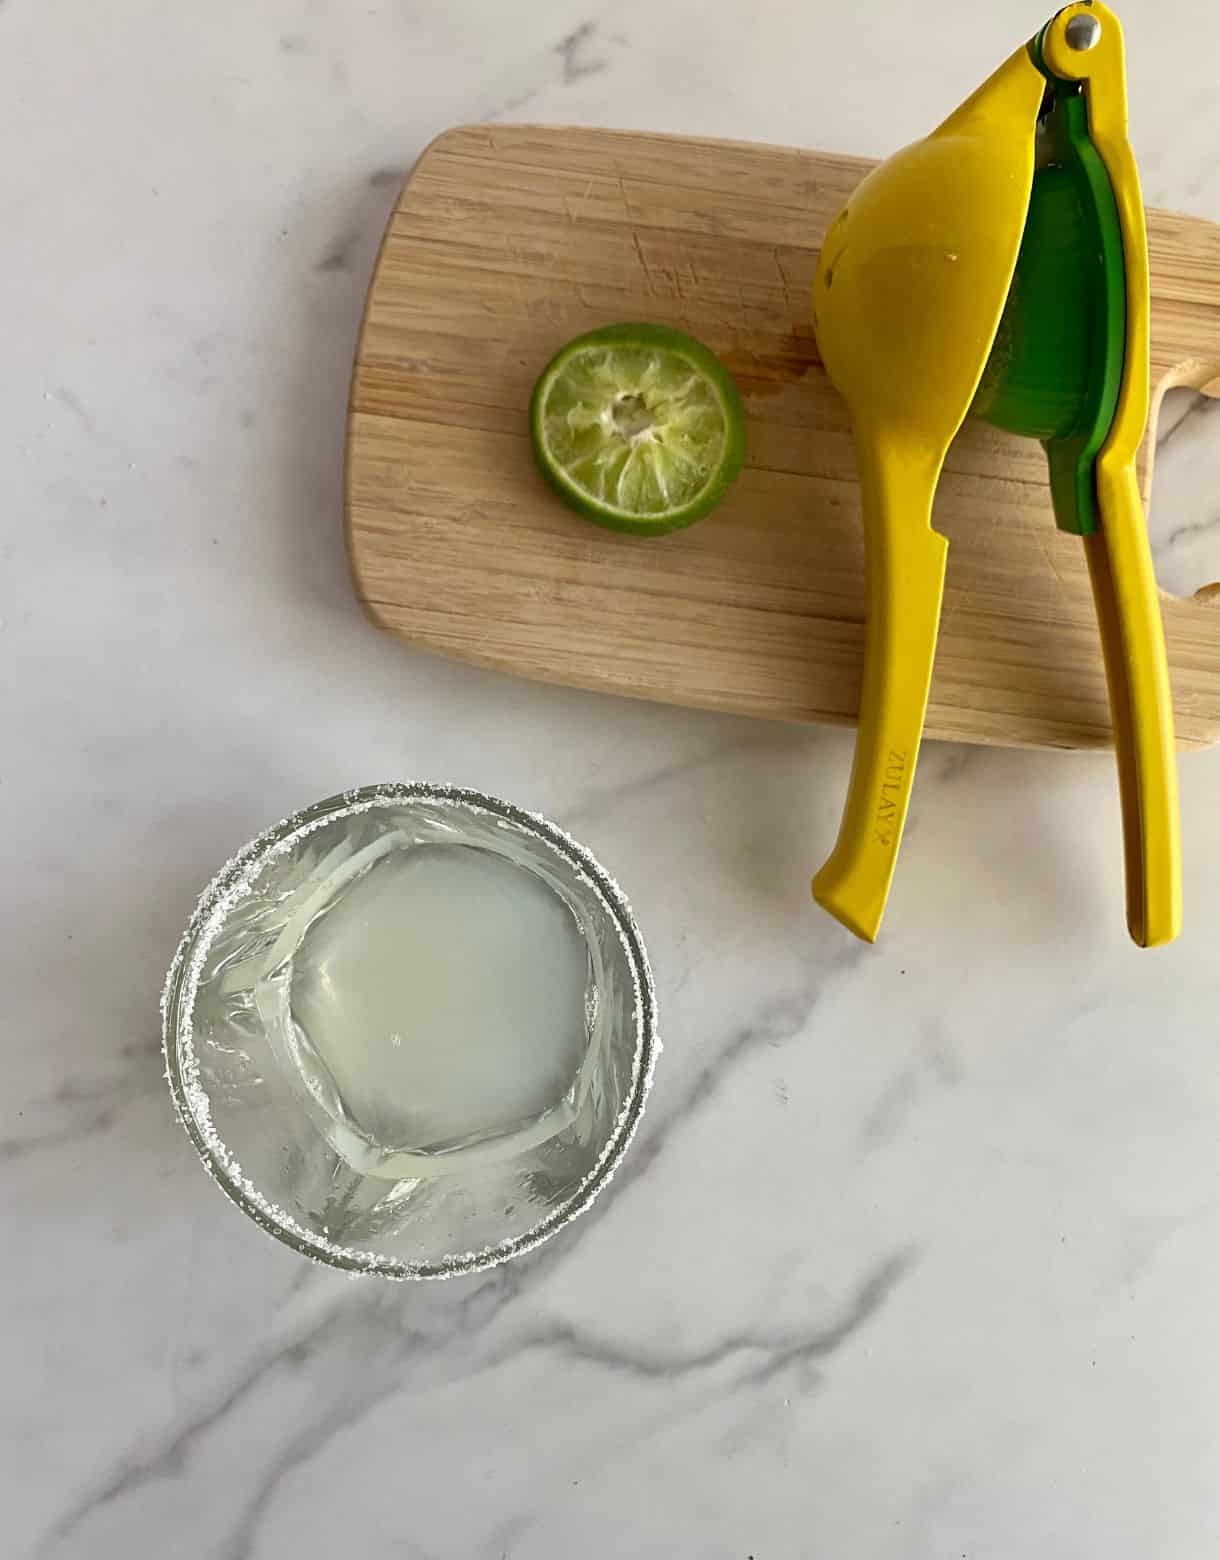 A glass with a salted rim with lime juice added. A cutting board with a juice press and a squeezed lime.